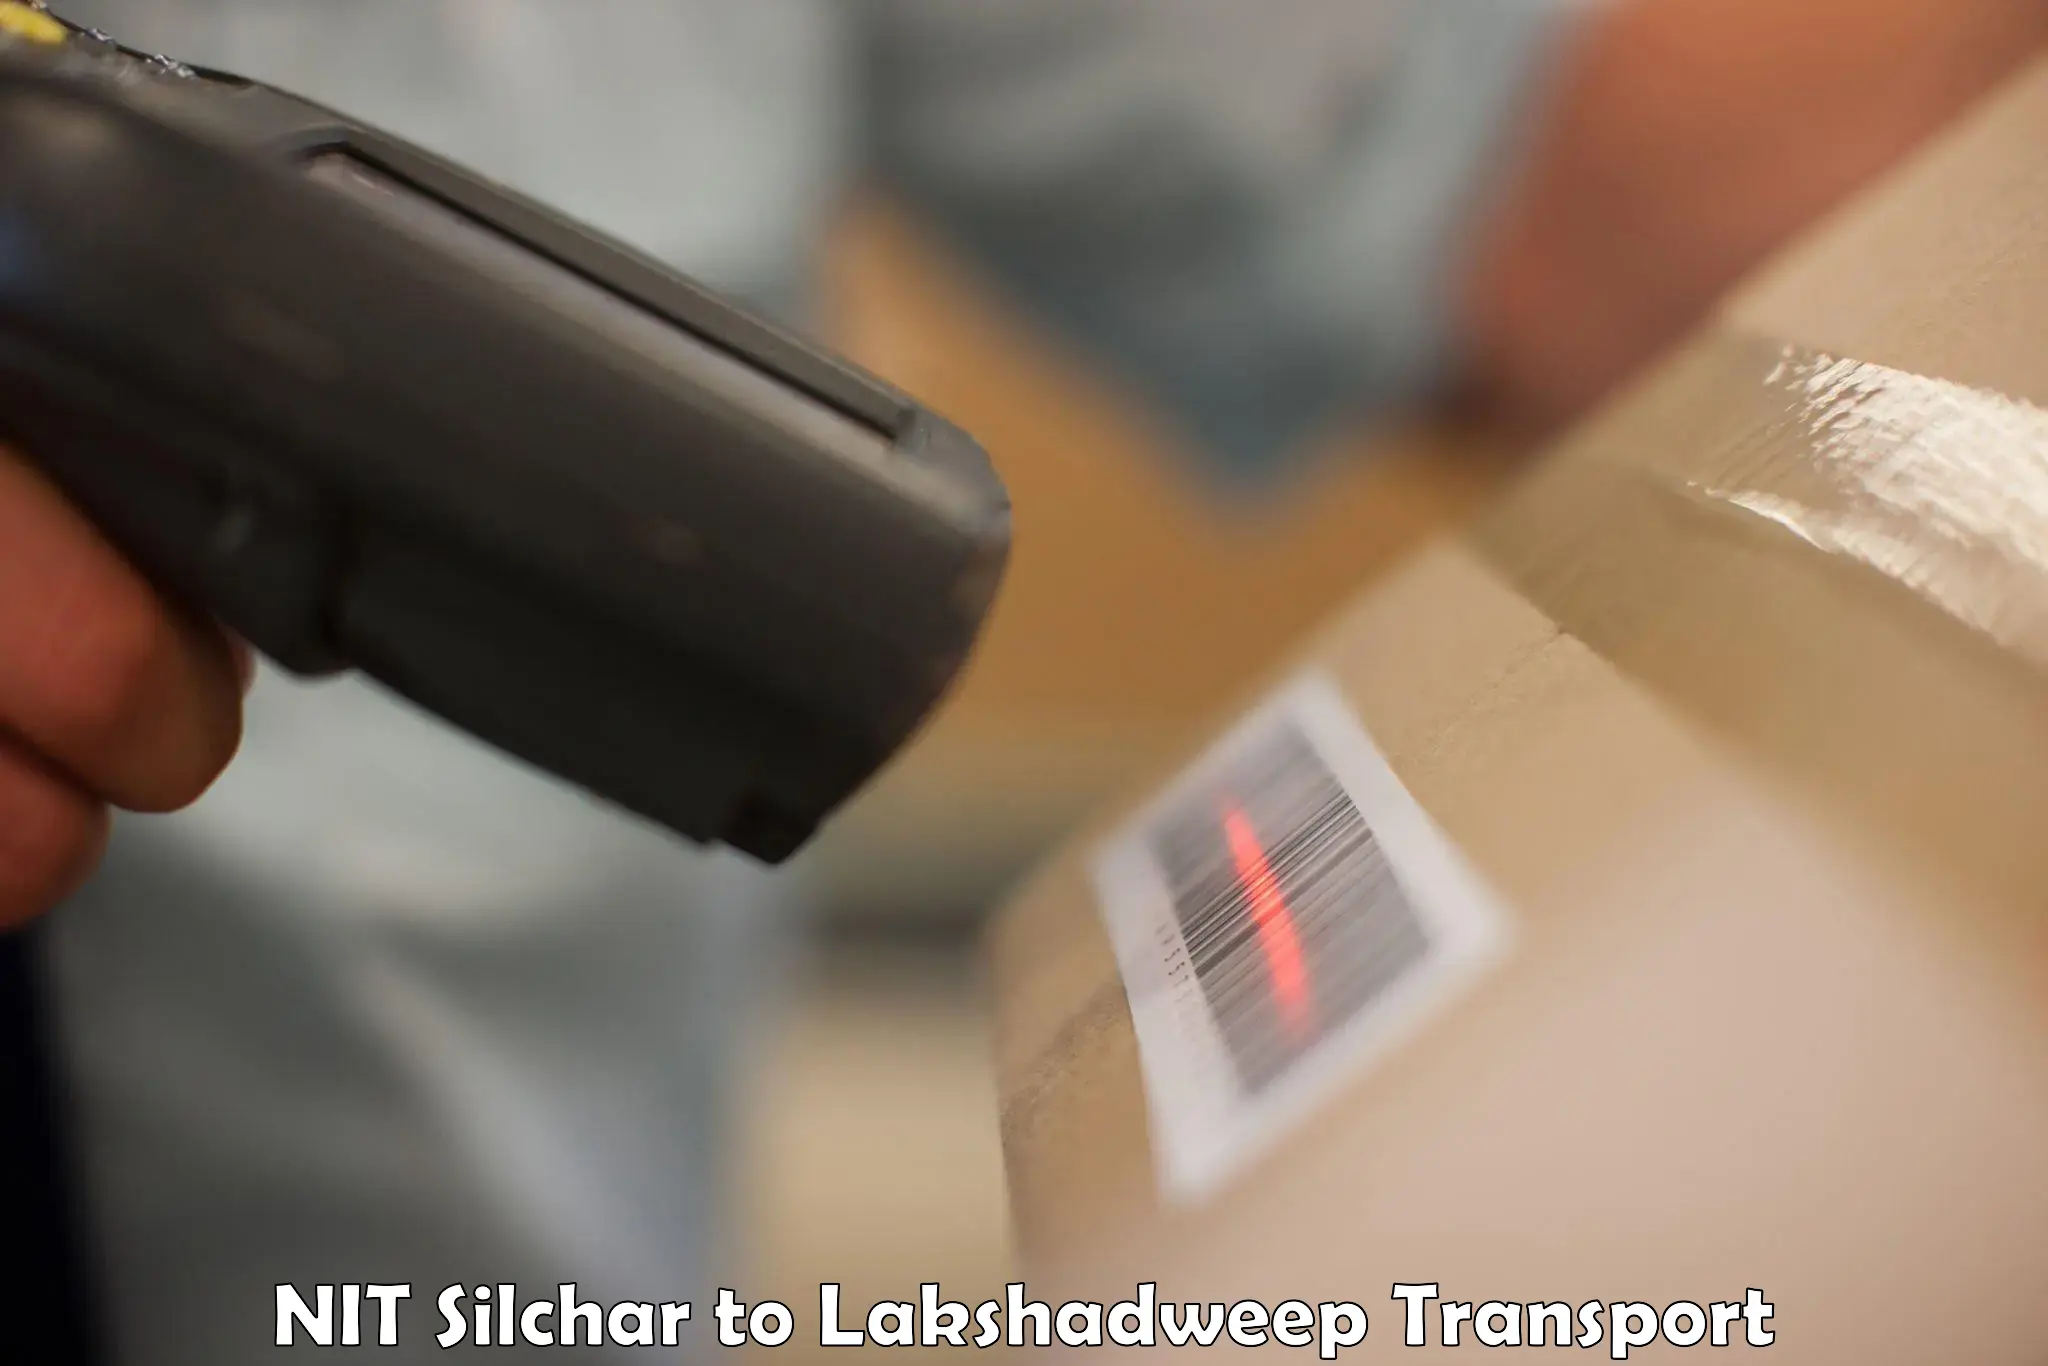 Luggage transport services NIT Silchar to Lakshadweep